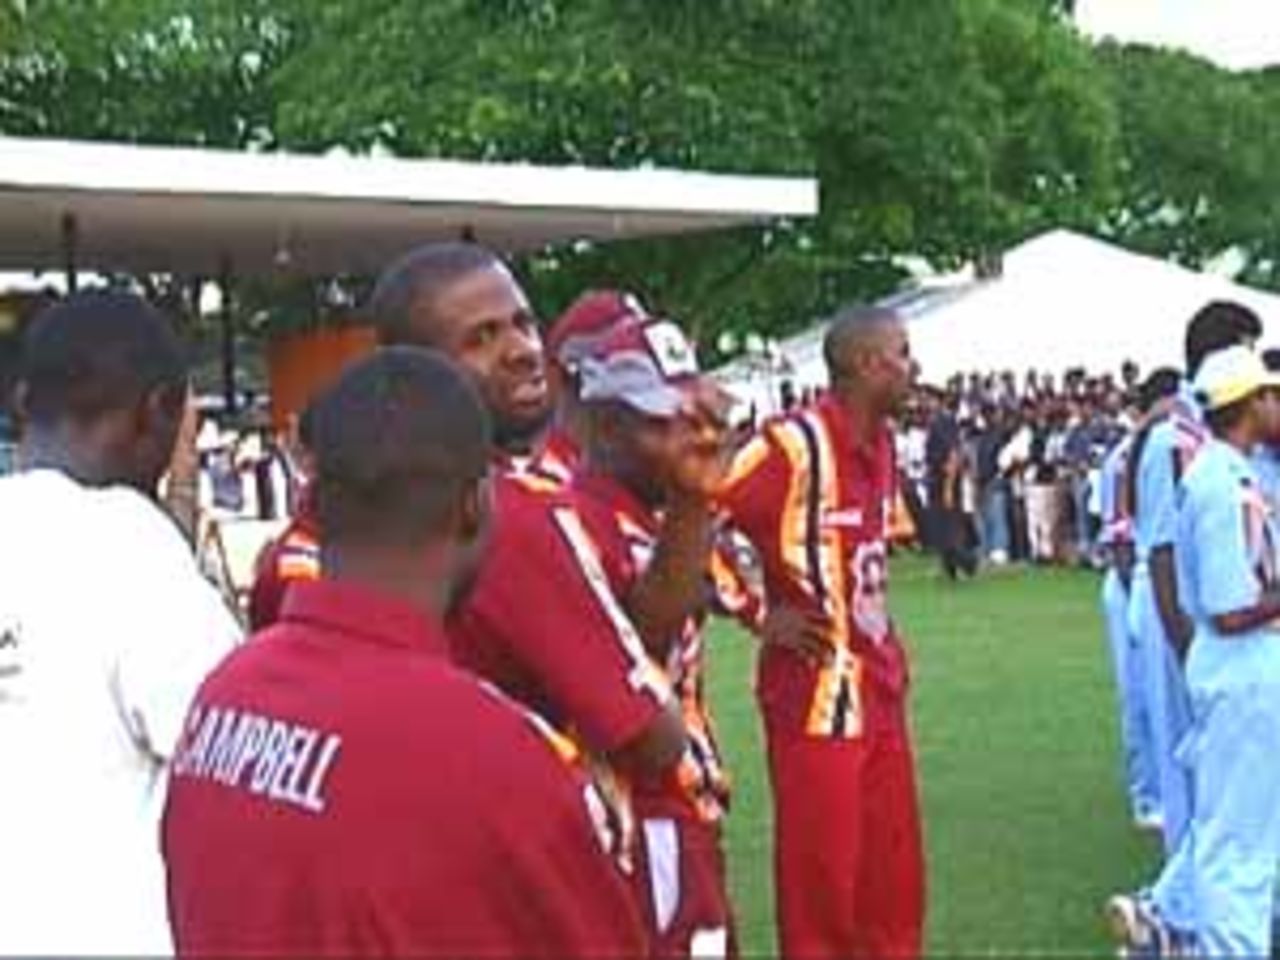 West Indians at the award ceremony, India v West Indies (3rd ODI), Coca-Cola Singapore Challenge, 1999-2000, Kallang Ground, Singapore, 5 Sep 1999.